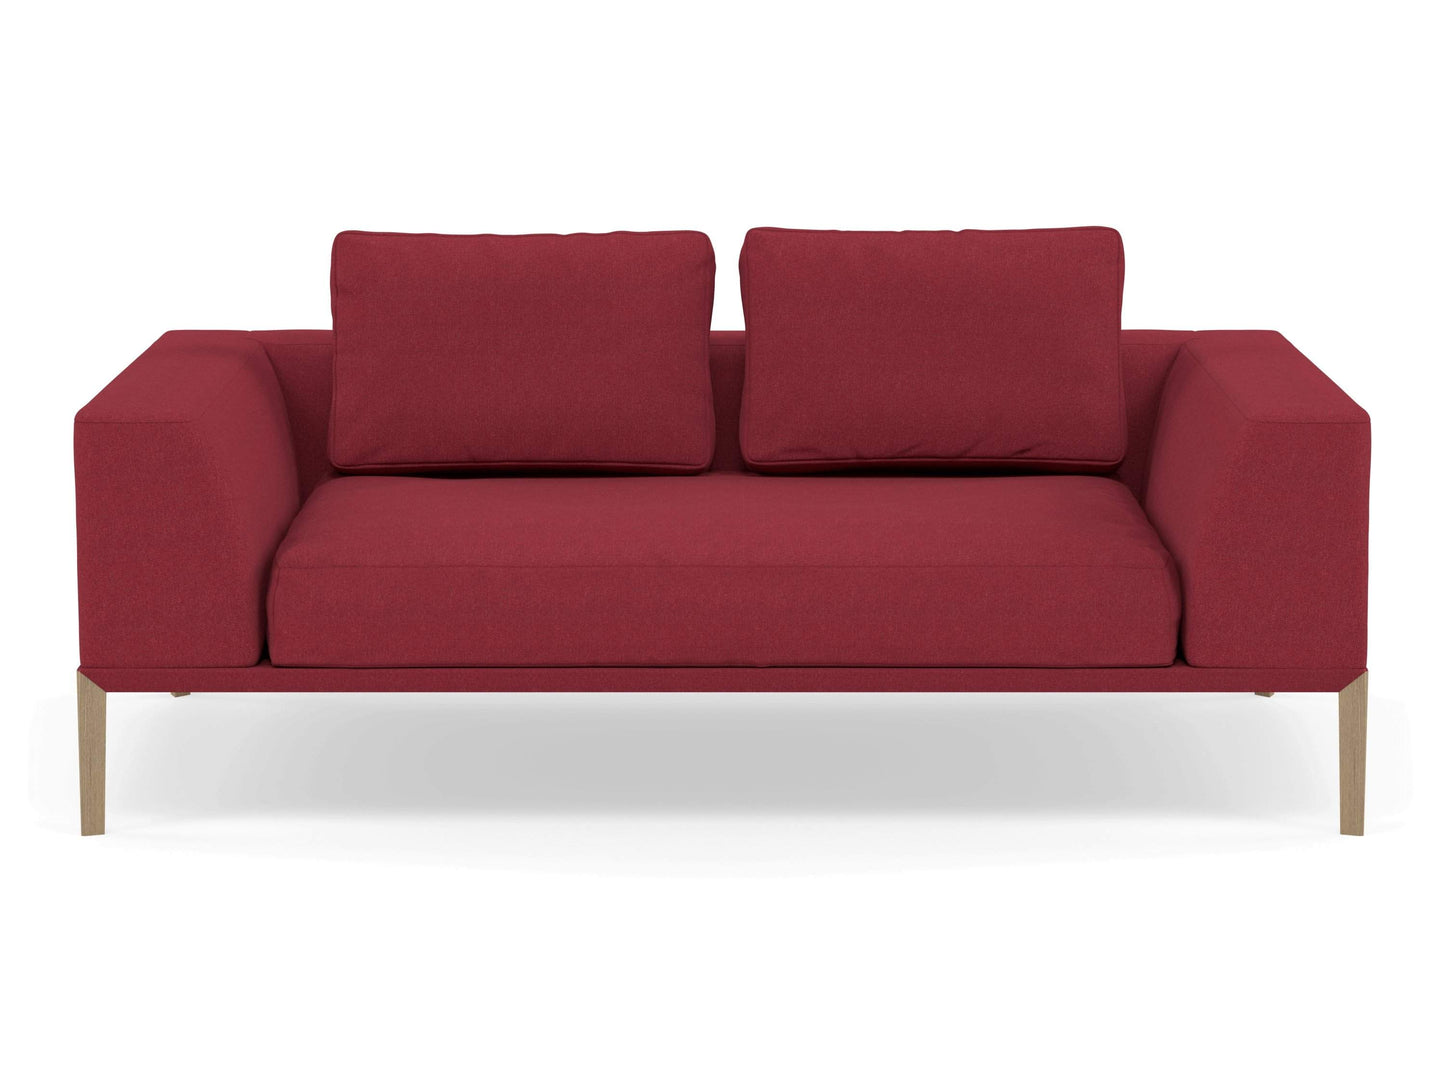 Modern 2 Seater Sofa with 2 Armrests in Rasberry Red Fabric-Natural Oak-Distinct Designs (London) Ltd